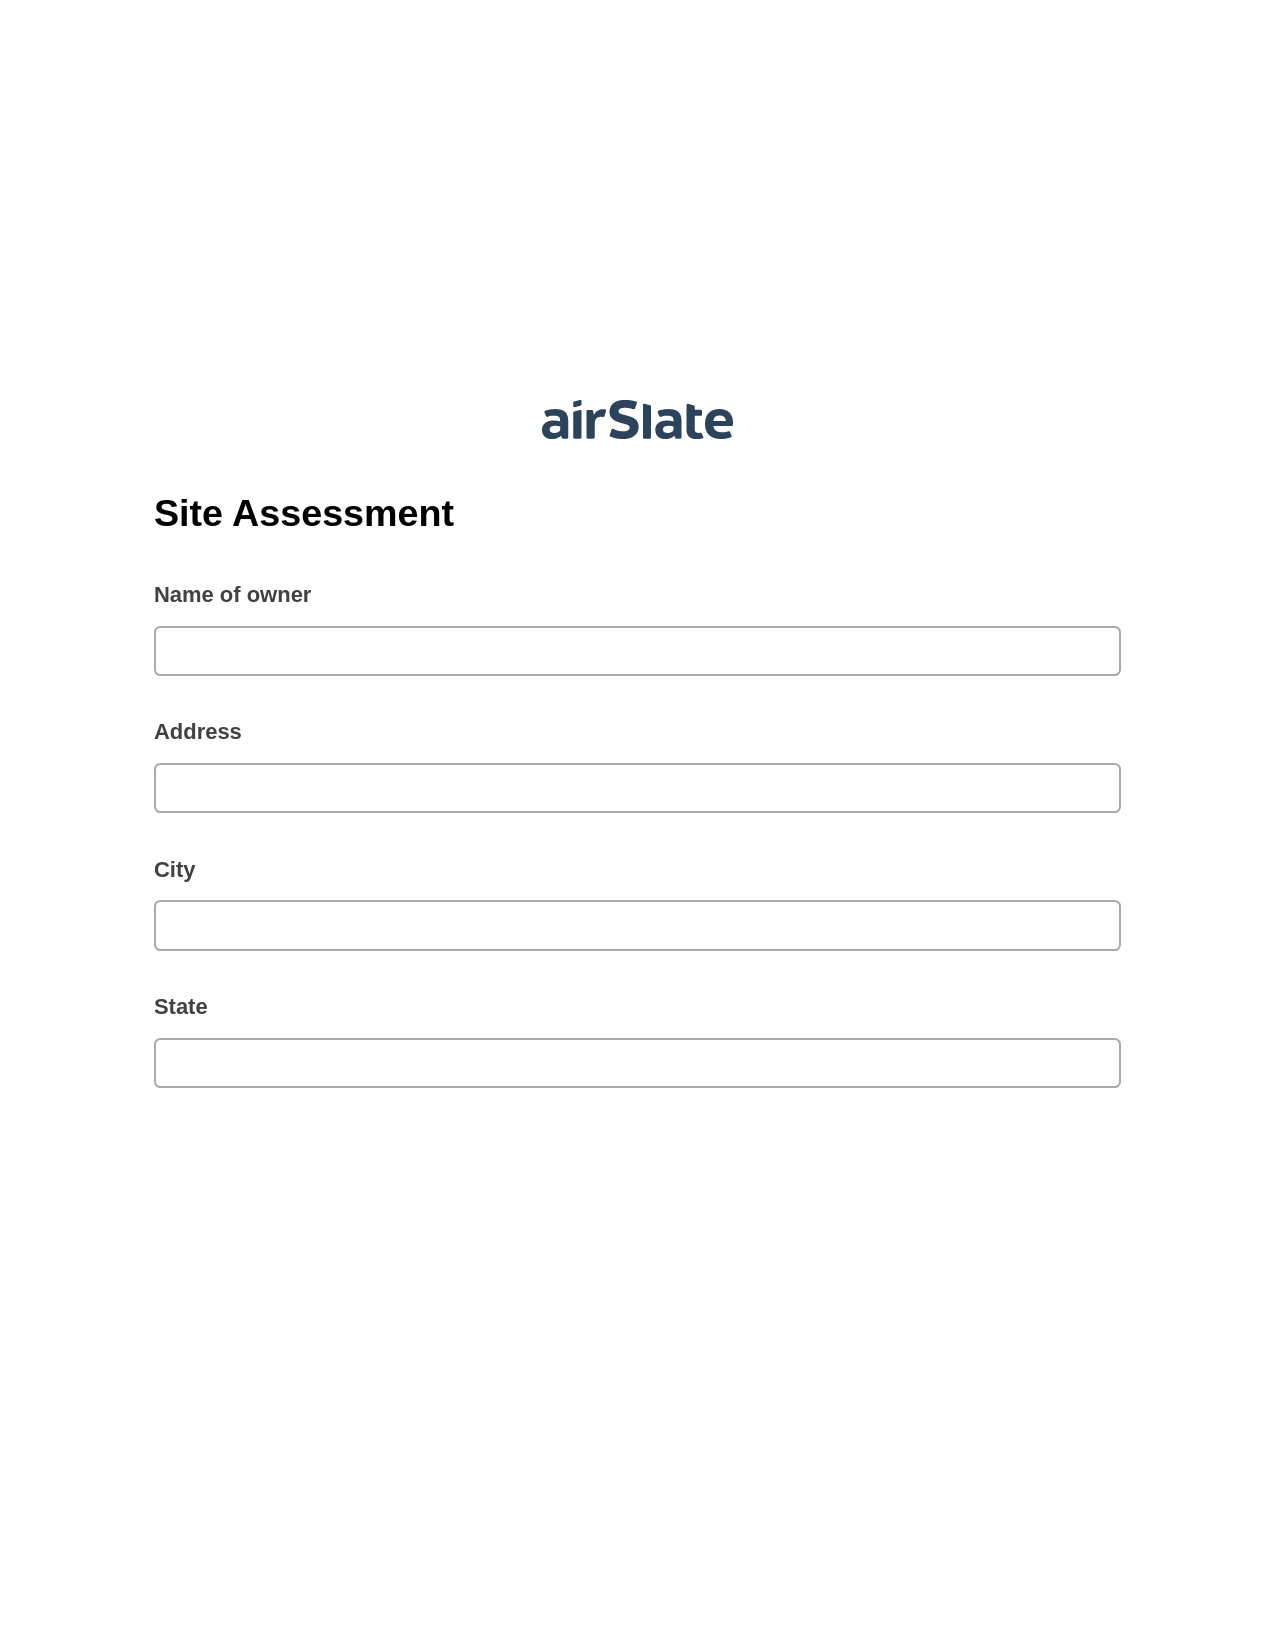 Site Assessment System Bot - Slack Two-Way Binding Bot, Send a Slate with Roles Bot, Dropbox Bot